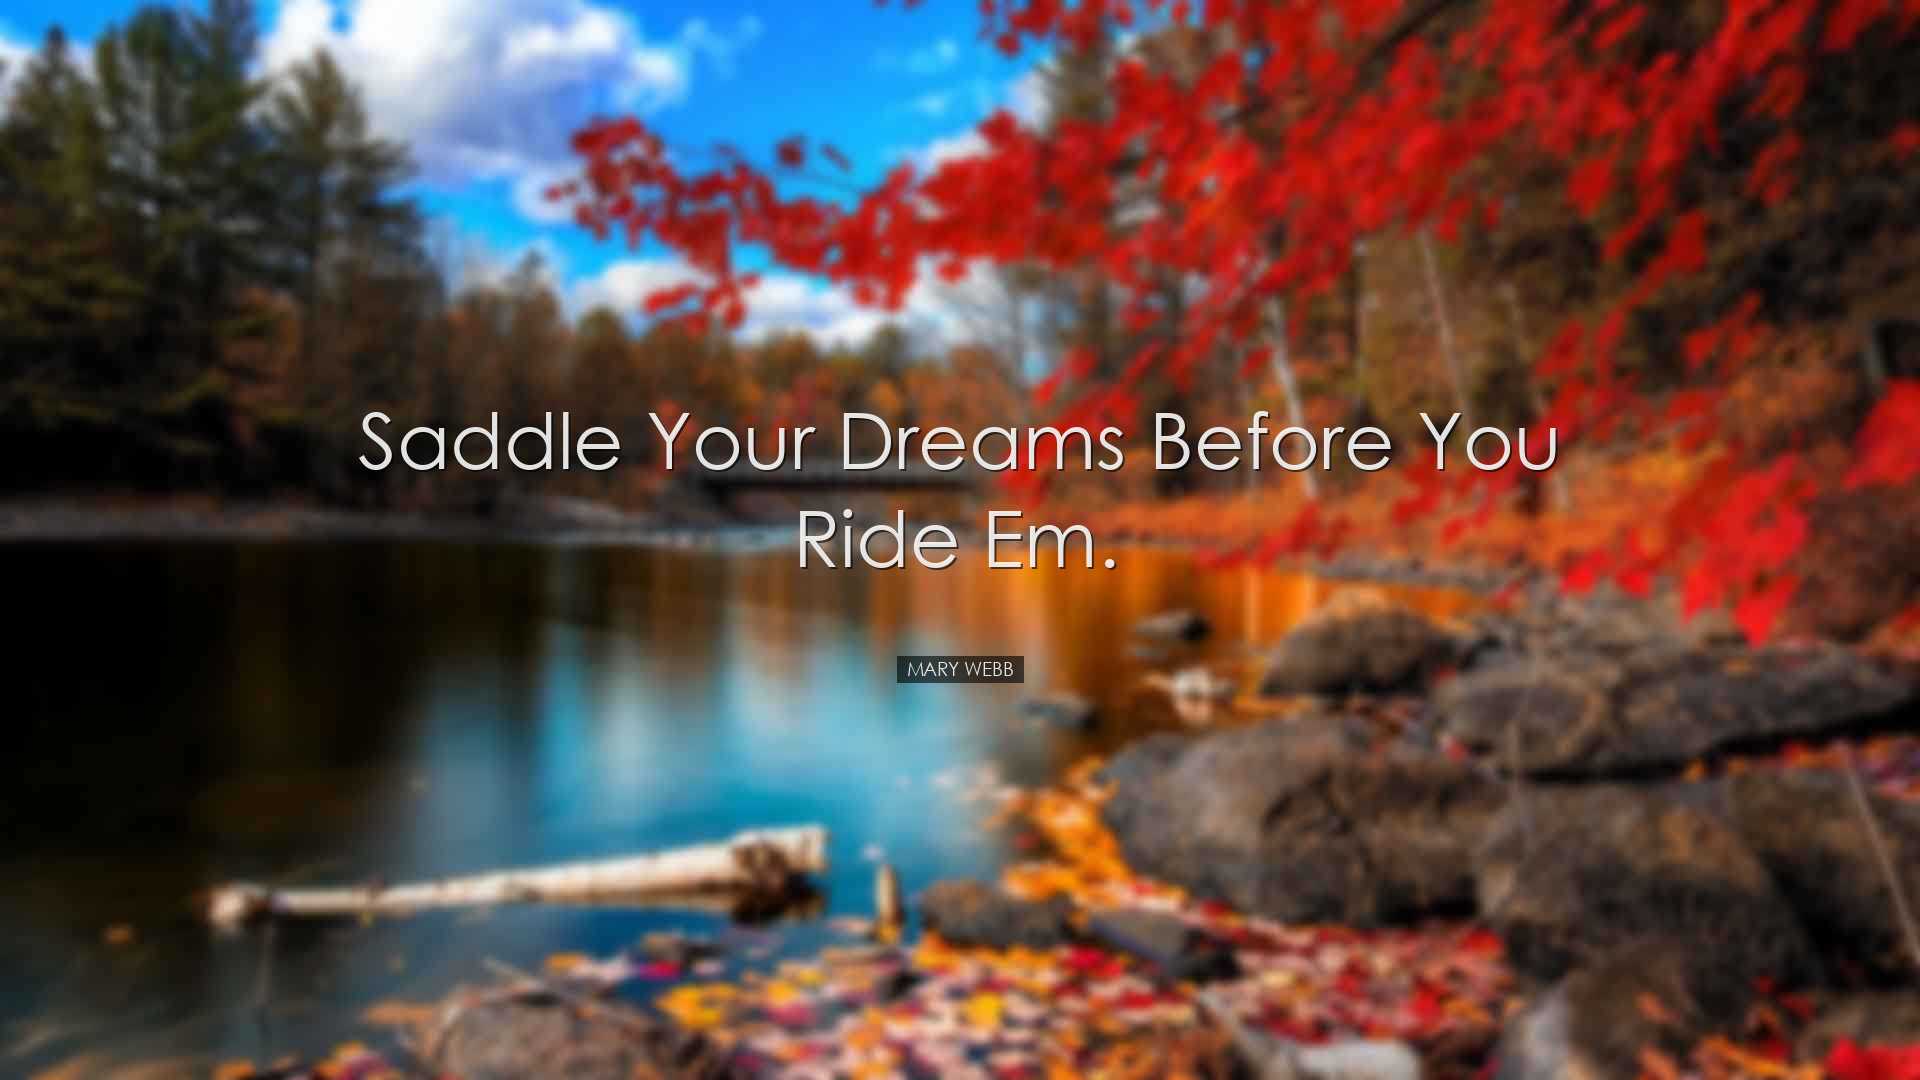 Saddle your dreams before you ride em. - Mary Webb